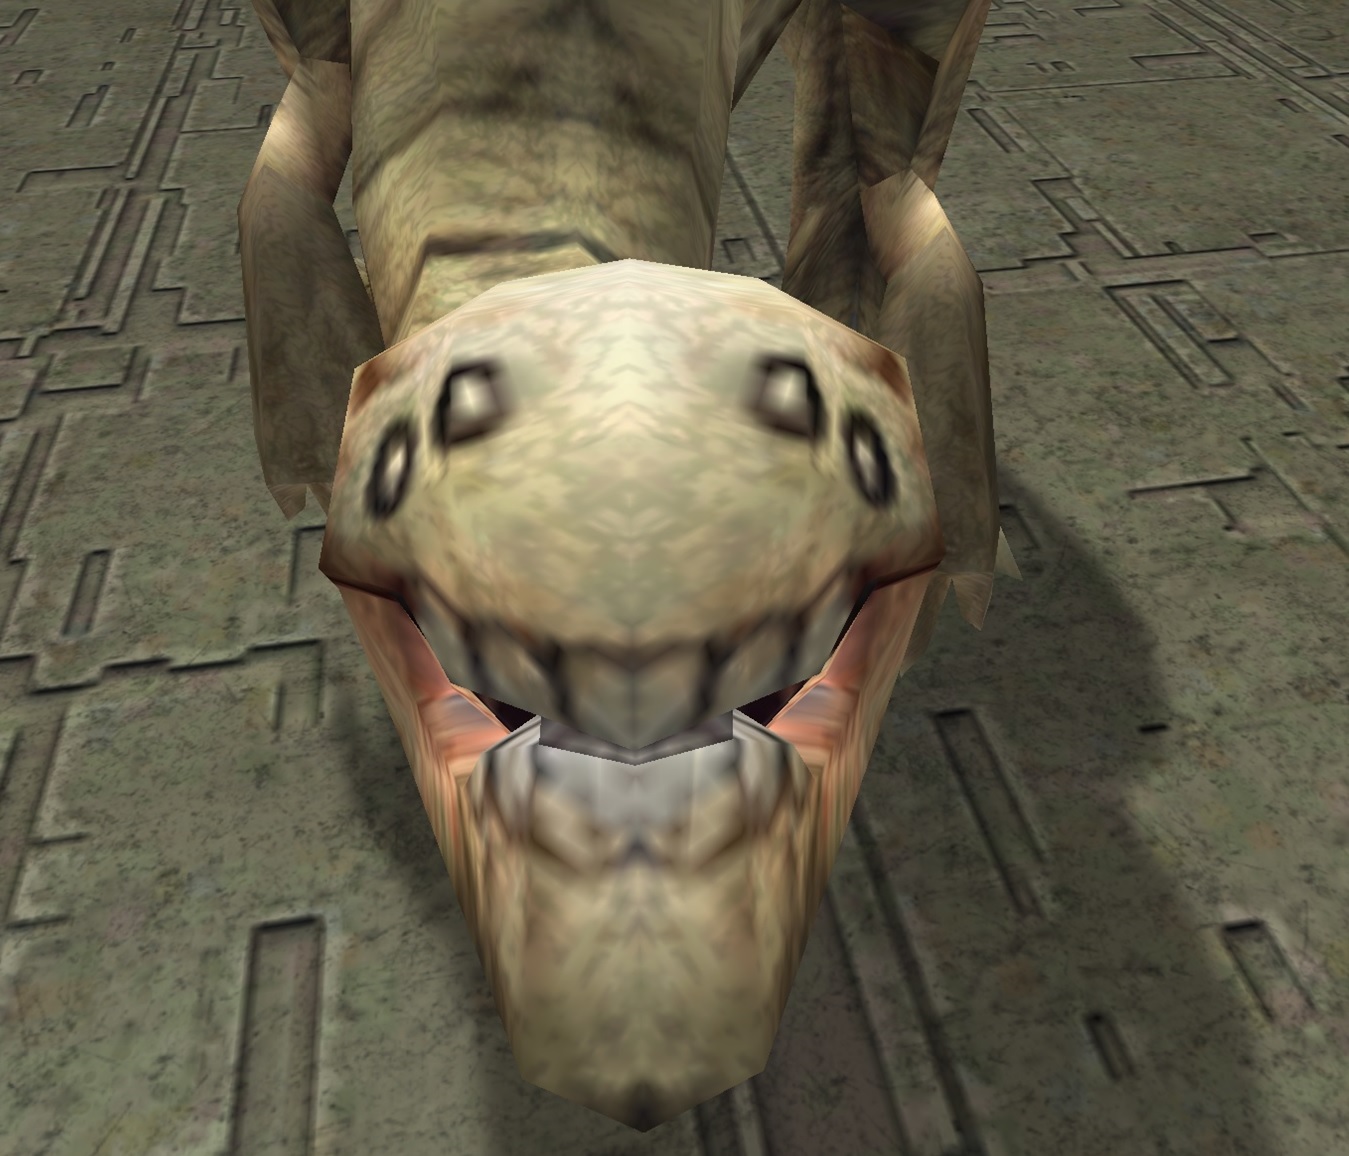 Close-up image of thorn beast "smiling"